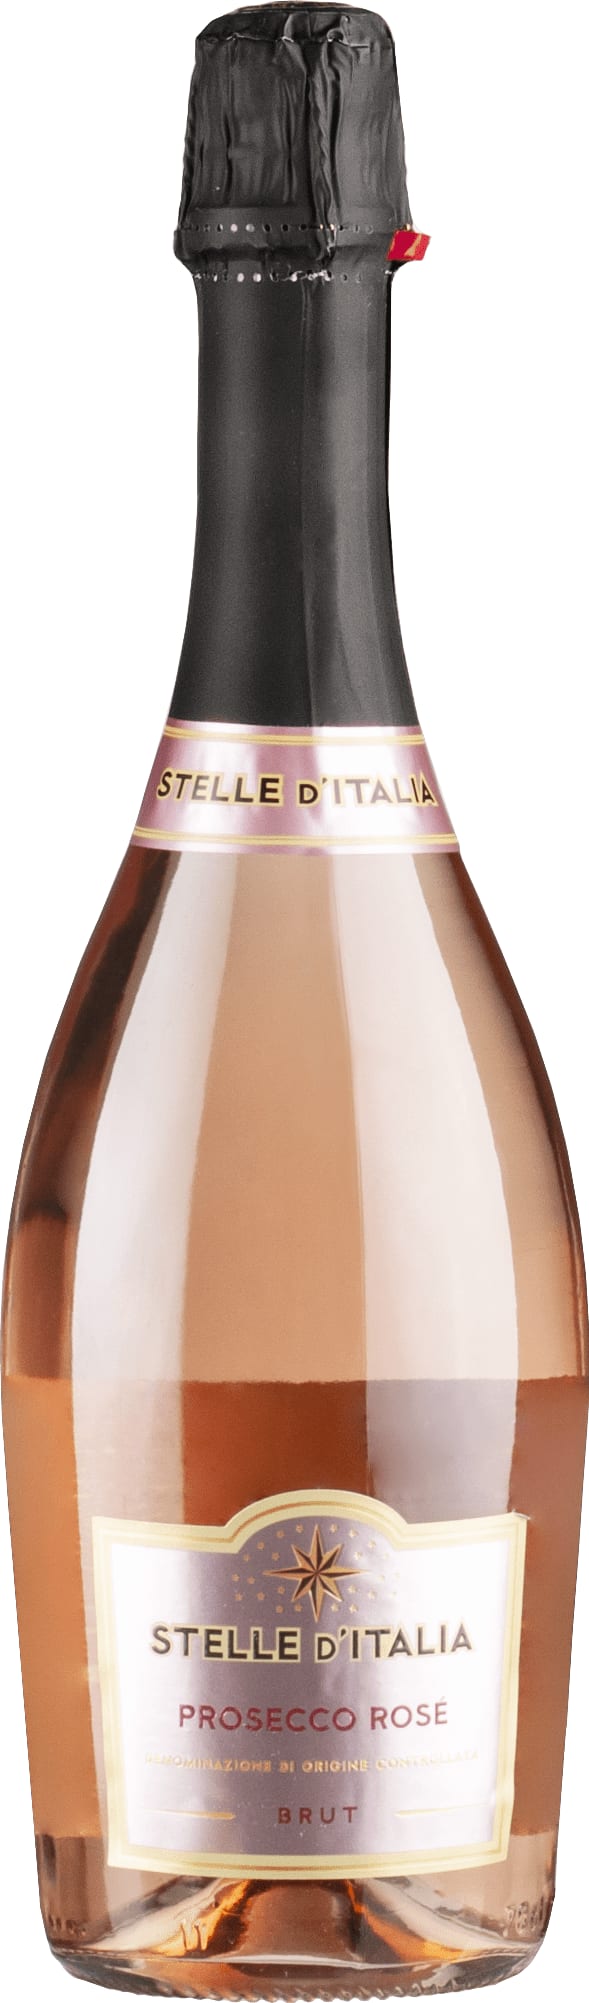 Prosecco Rose 22 Stelle d'Italia 75cl - Buy Stelle d'Italia Wines from GREAT WINES DIRECT wine shop